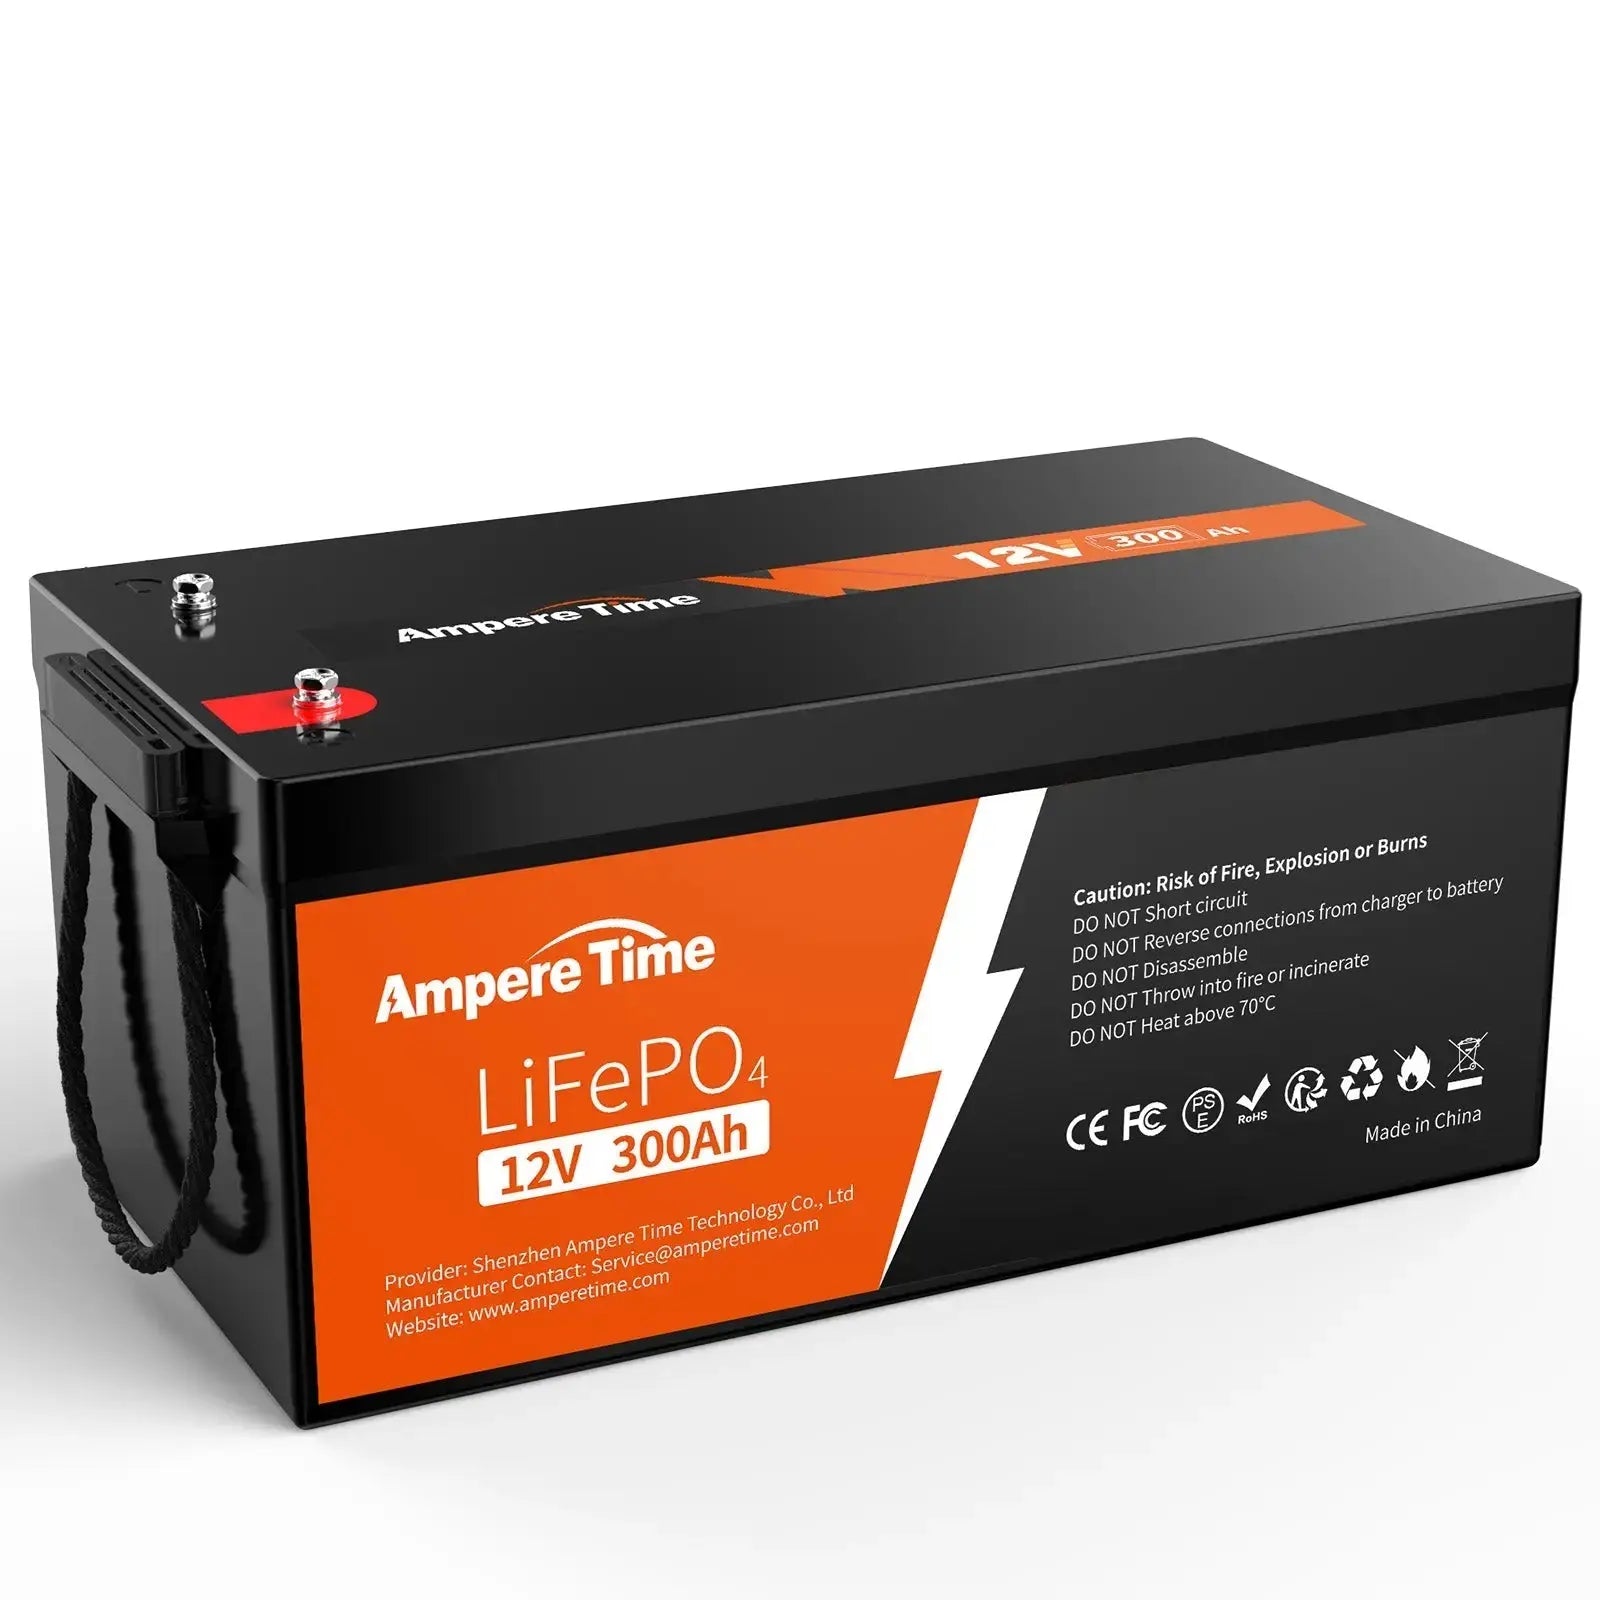 ✅Like New✅ Ampere Time 12V 300Ah, 3840Wh LiFePO4 Battery & Built in 200A BMS Ampere Time